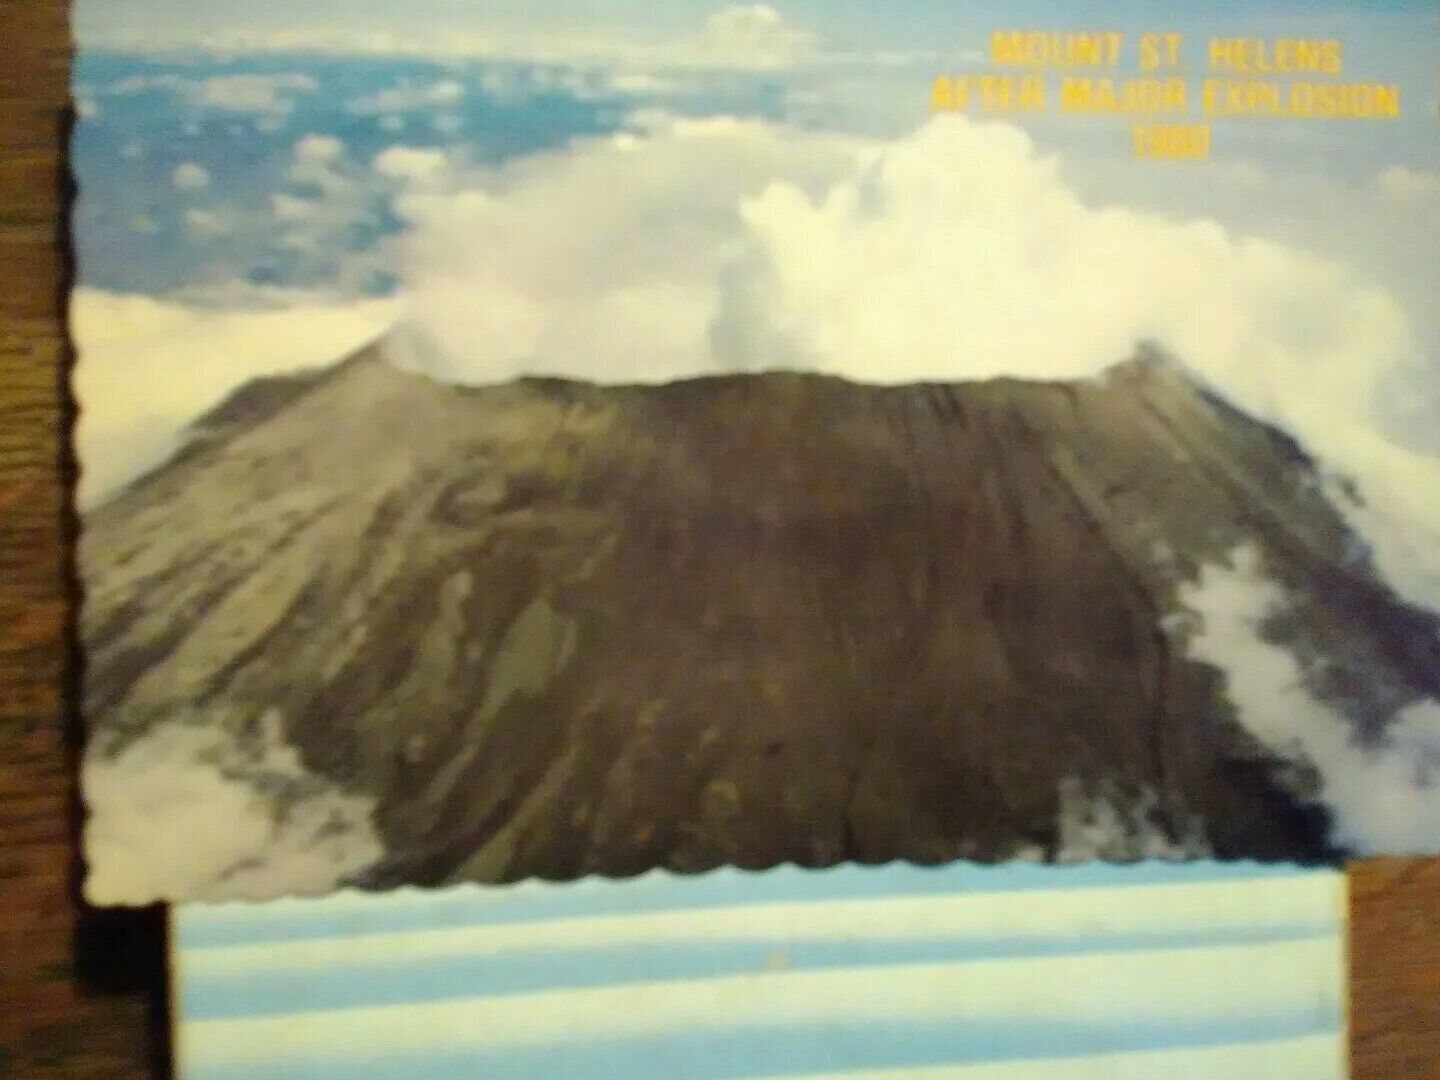 POST CARD AFTER EXPLOSION 1980 MOUNT ST.HELENS WA.